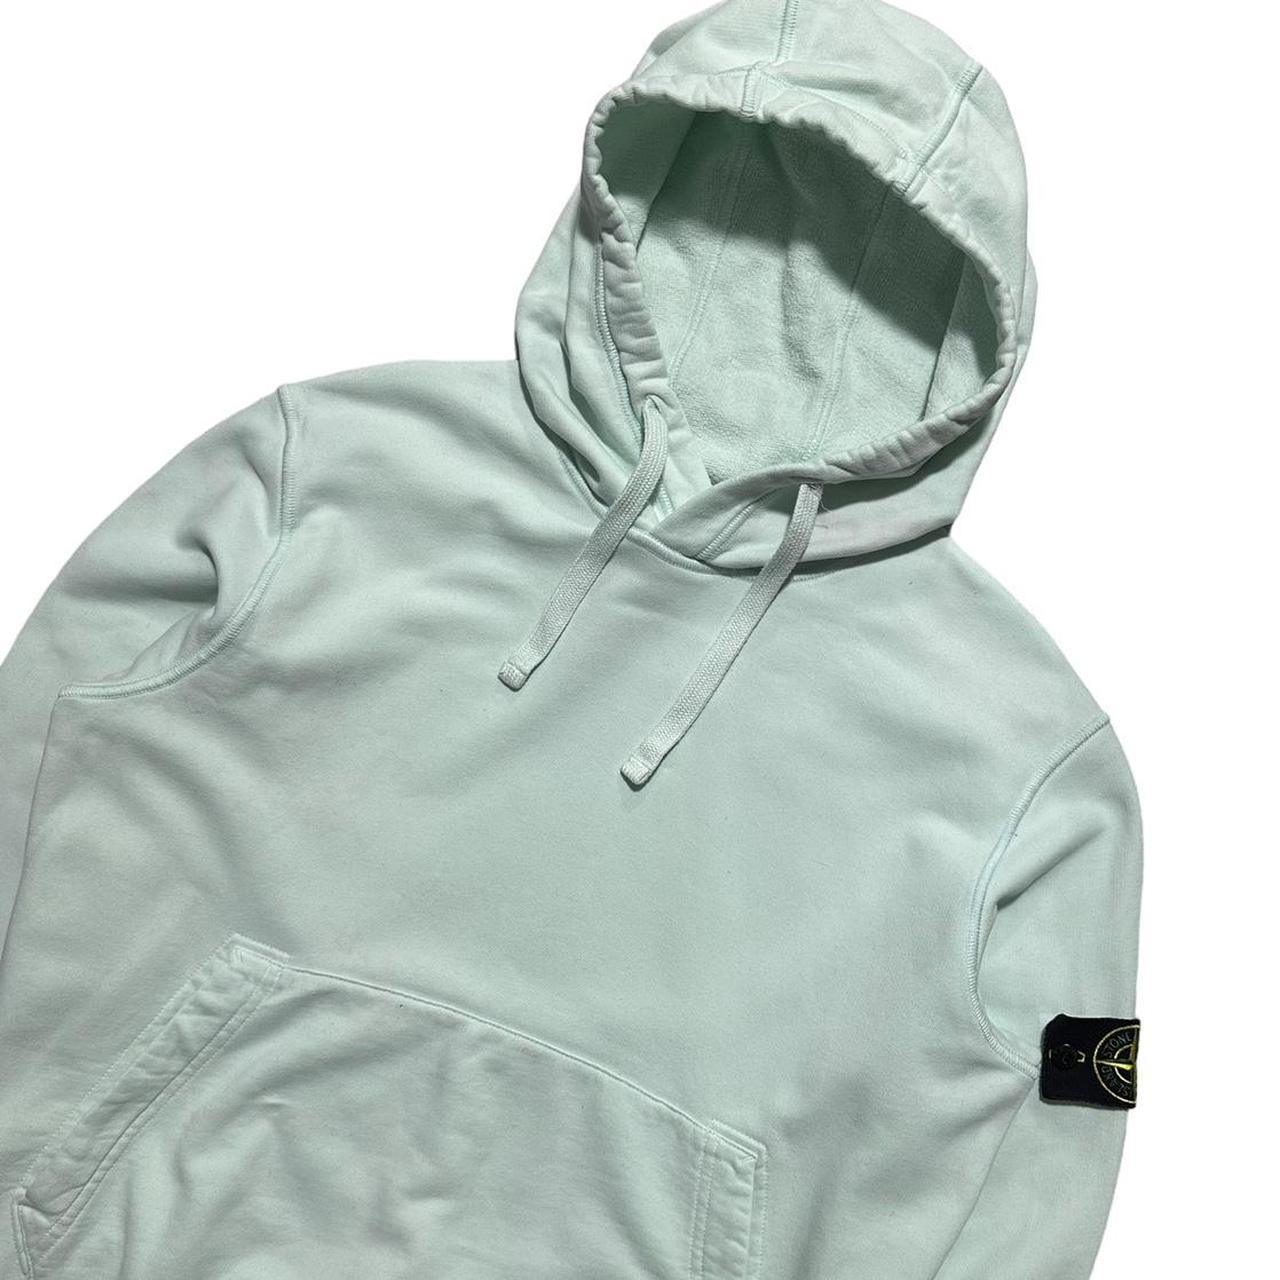 Stone Island Light Blue Pullover Hoodie - Known Source